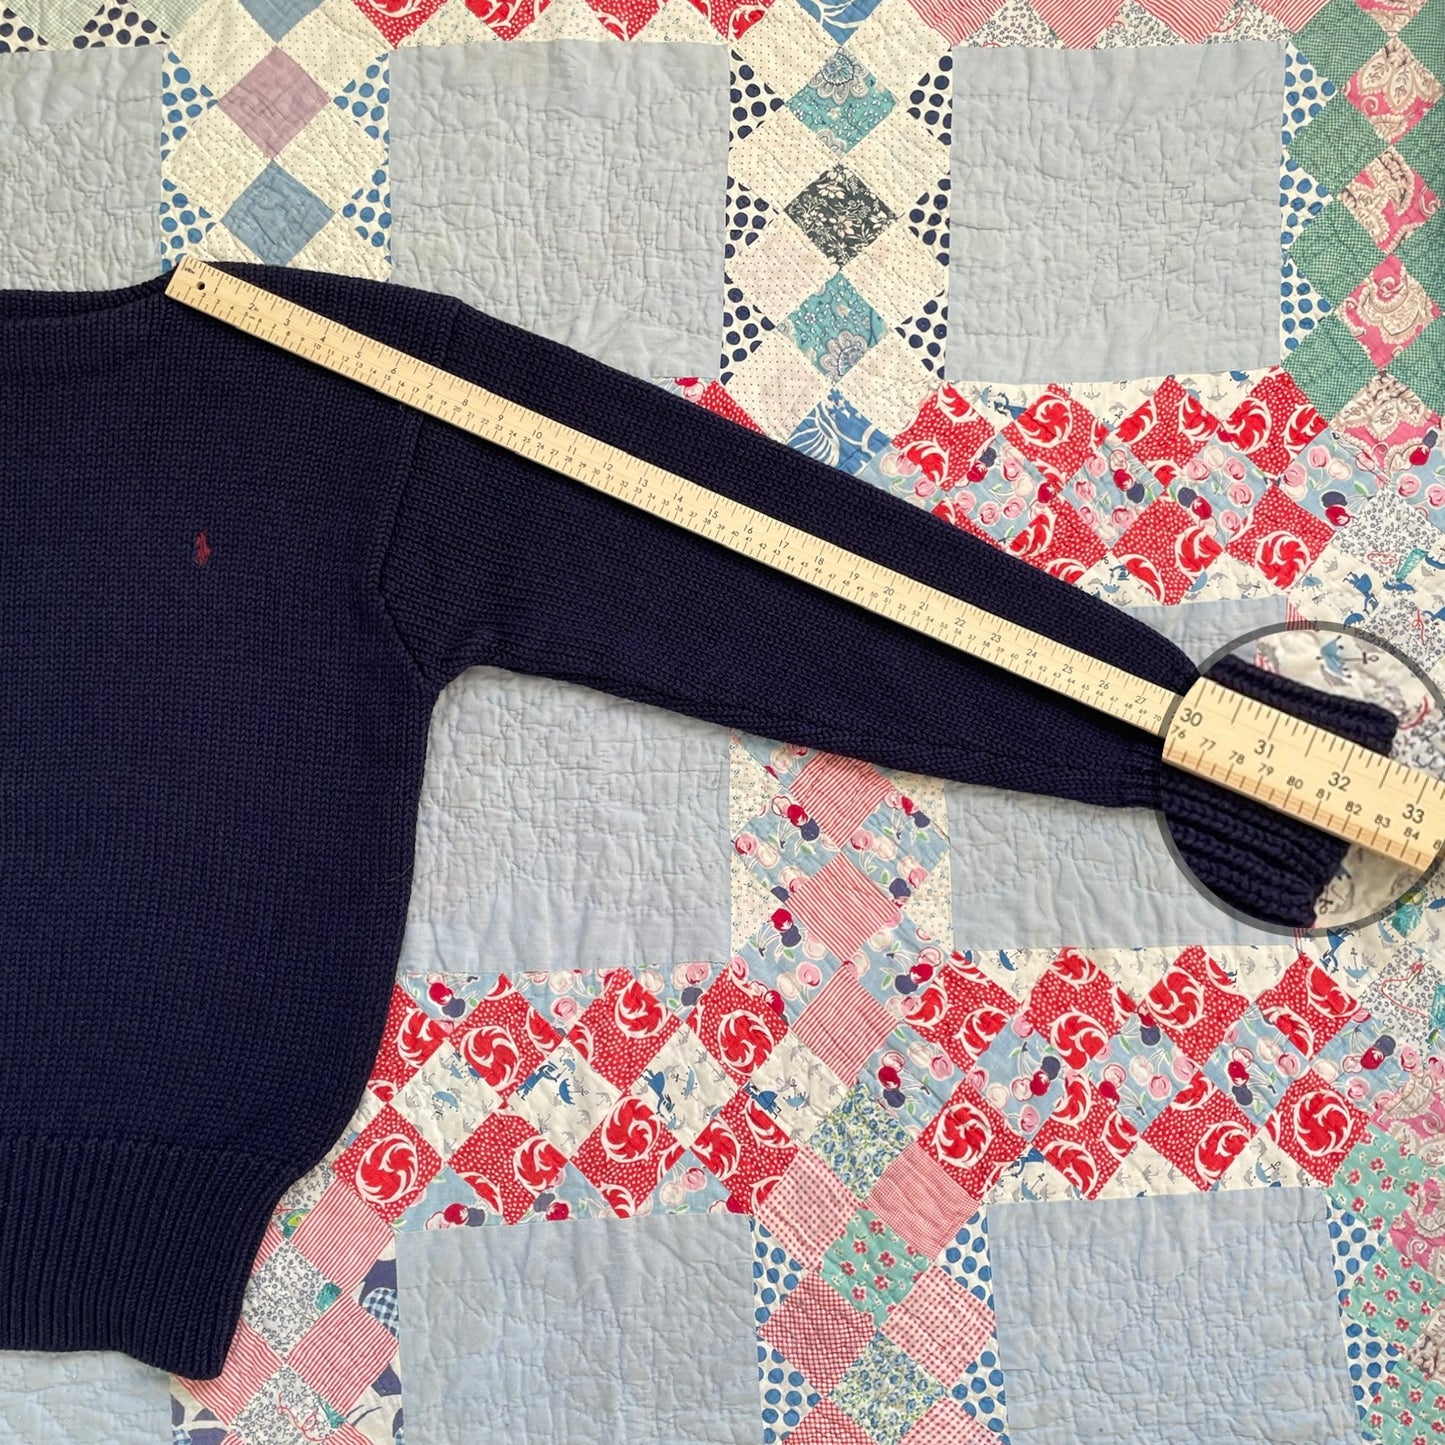 90s Polo by Ralph Lauren Chunky Wool Boat Neck Sweater L